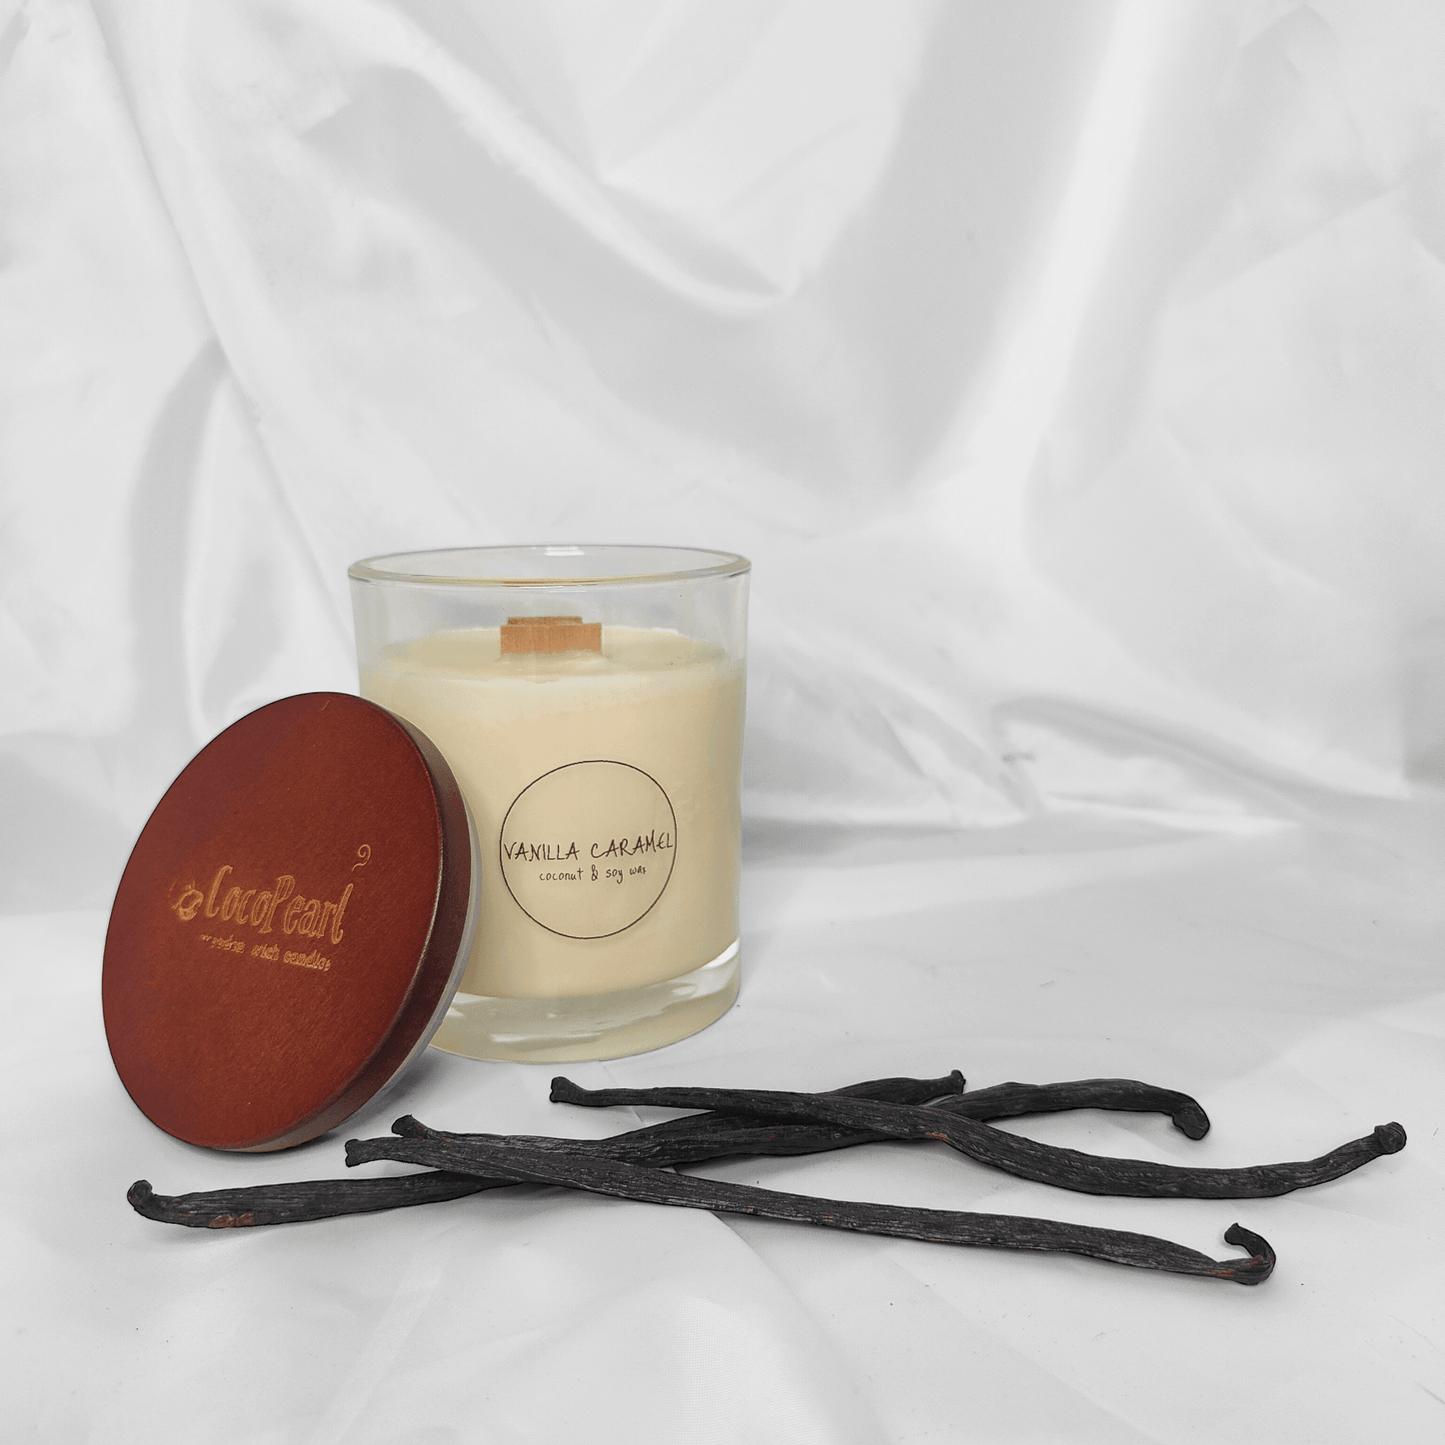 Vanilla caramel | Scented Candle - Wooden wick - Lid Off